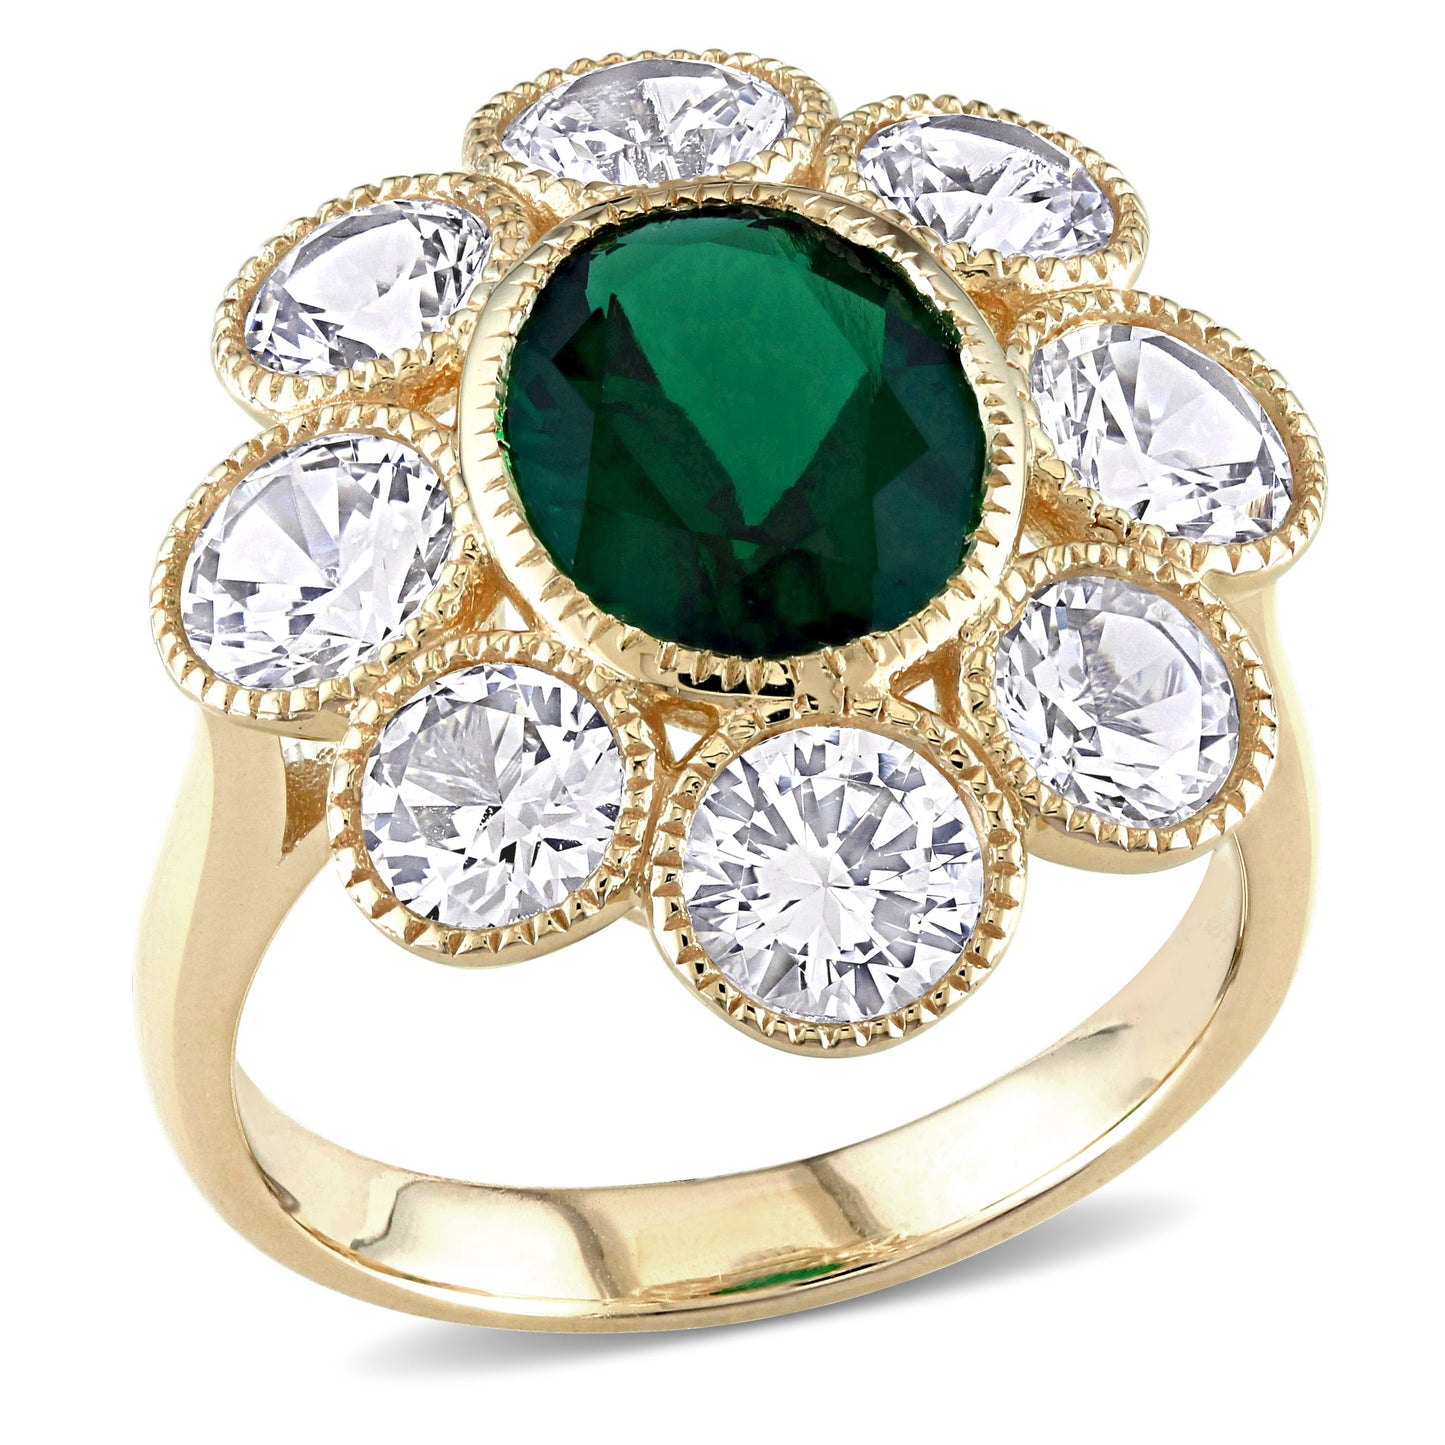 Emerald & White Sapphire Flower Ring in 10k Yellow Gold